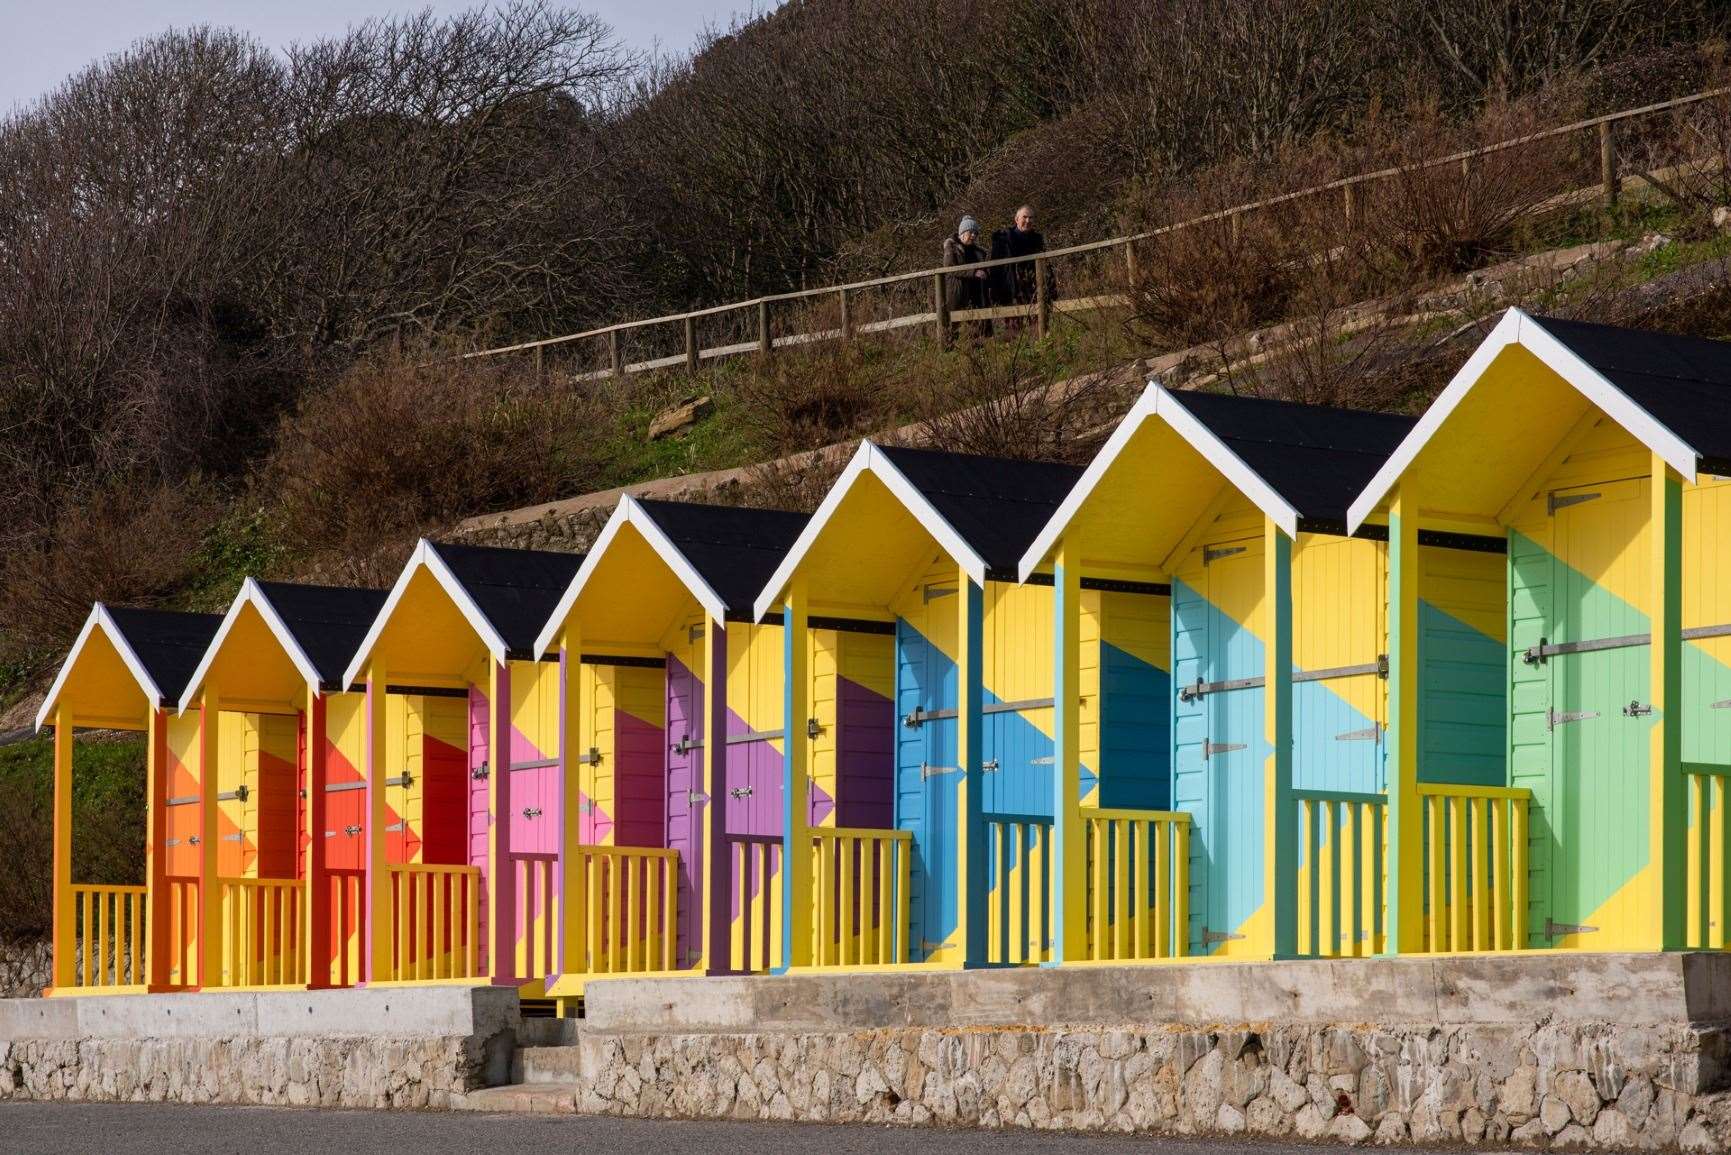 Beach huts on Folkestone seafront. Picture: @thierry_bal on Instagram